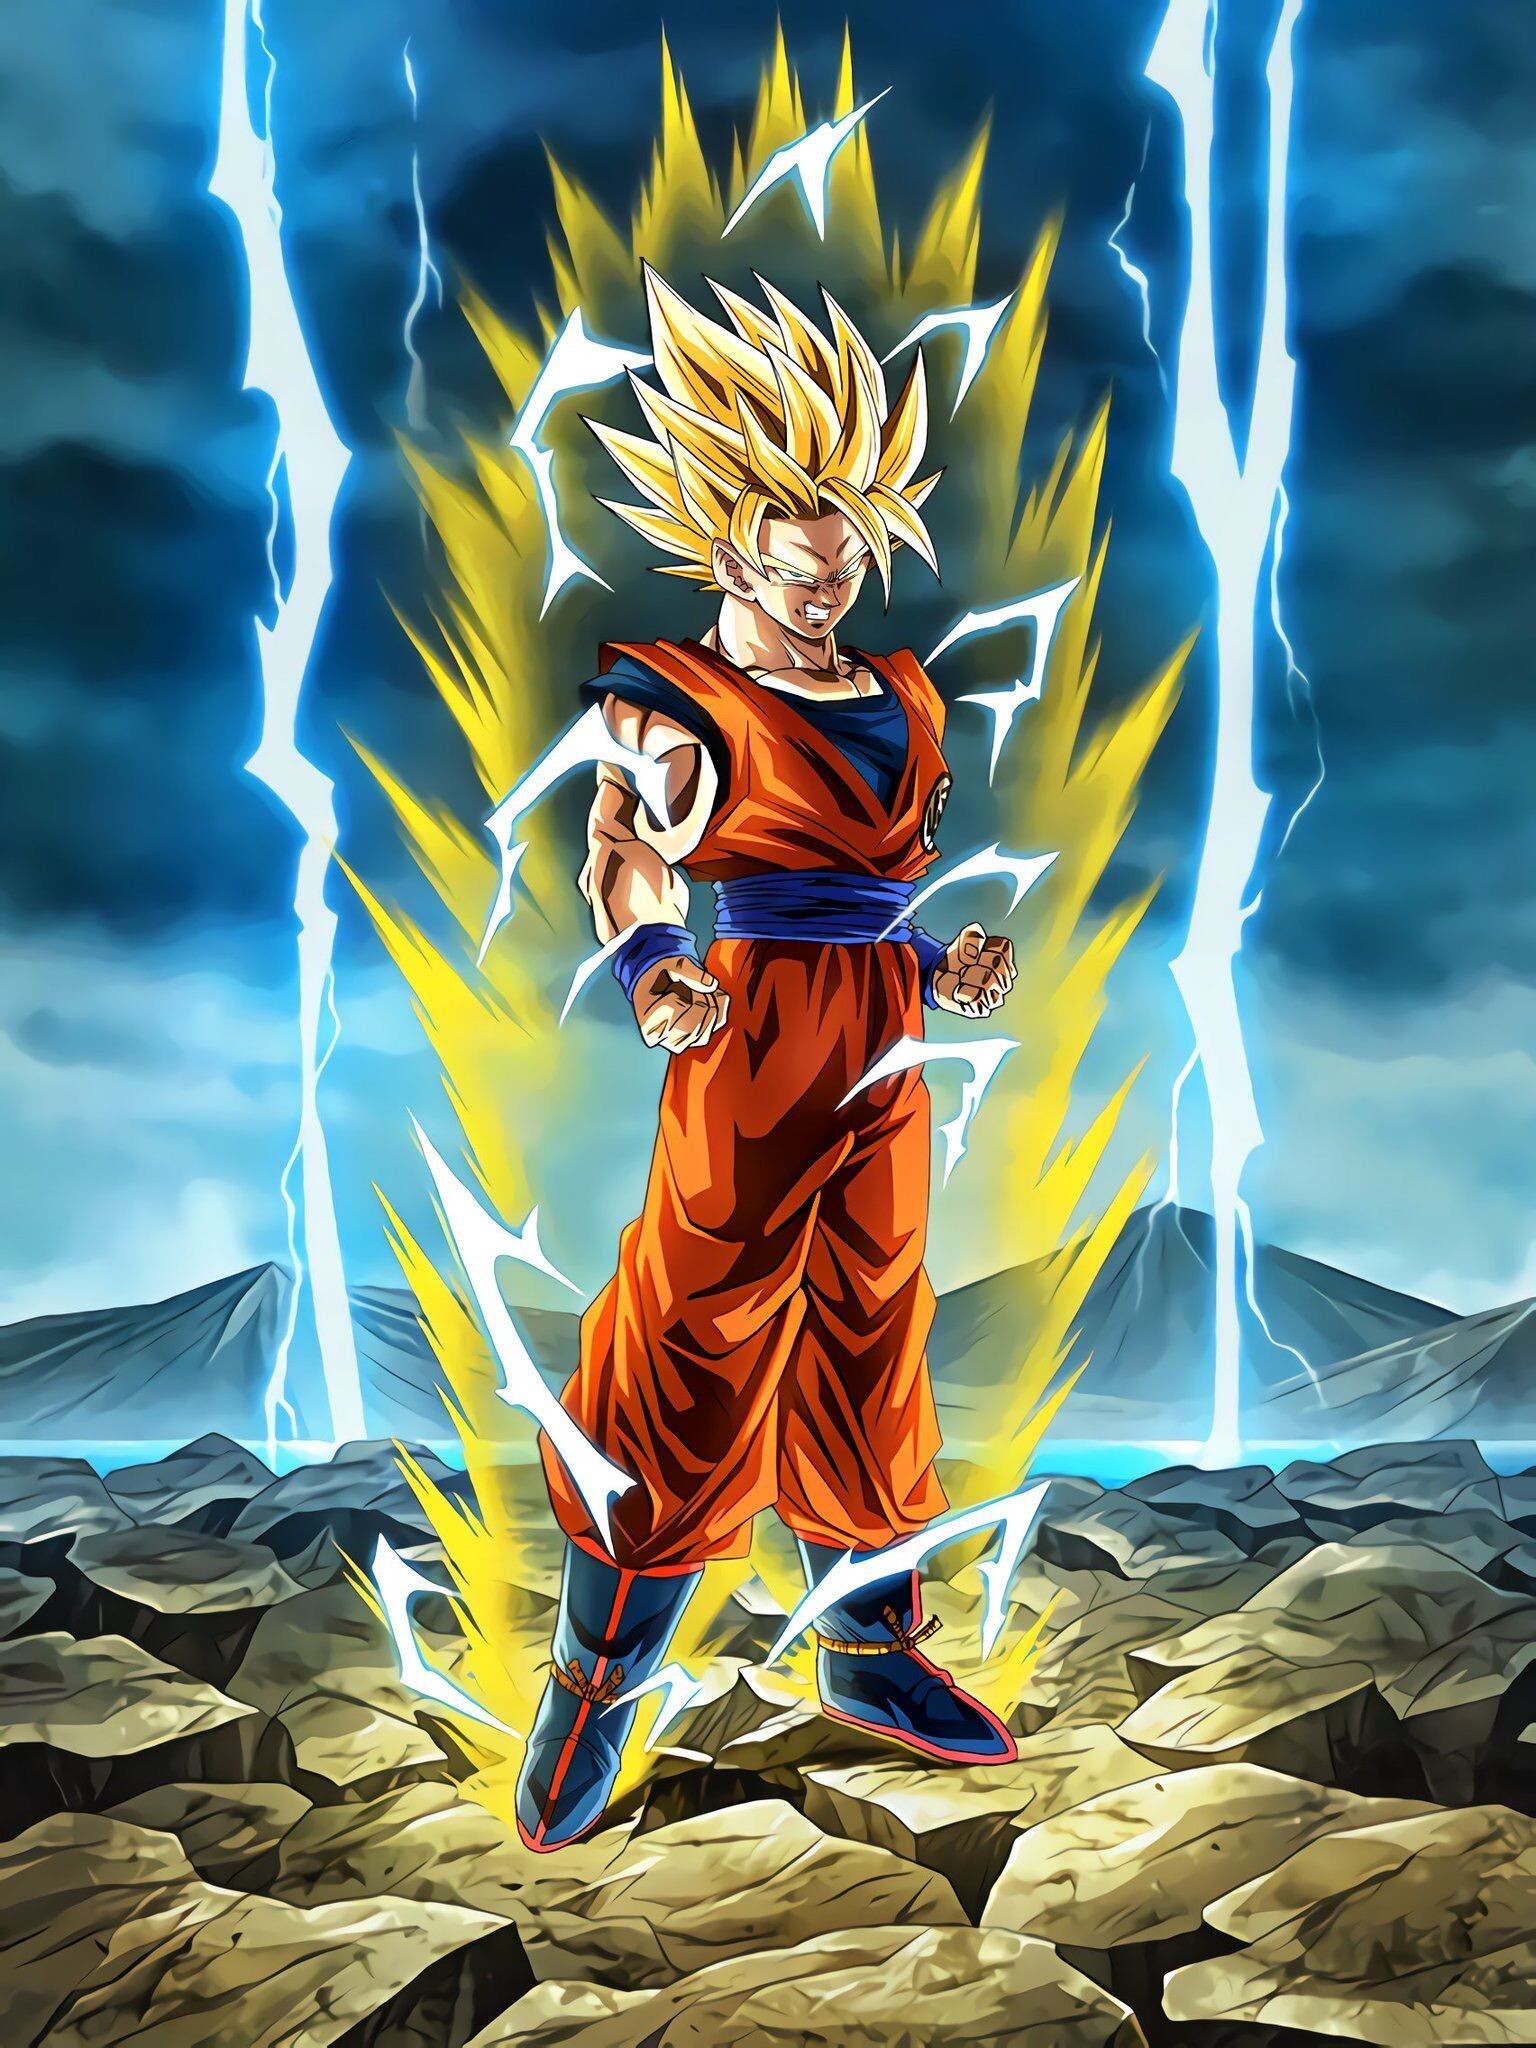 Goku Super Saiyan: Goku's transformation, SSJ1, Achieving the form out of anger over the murder of his best friend Krillin. 1540x2050 HD Wallpaper.